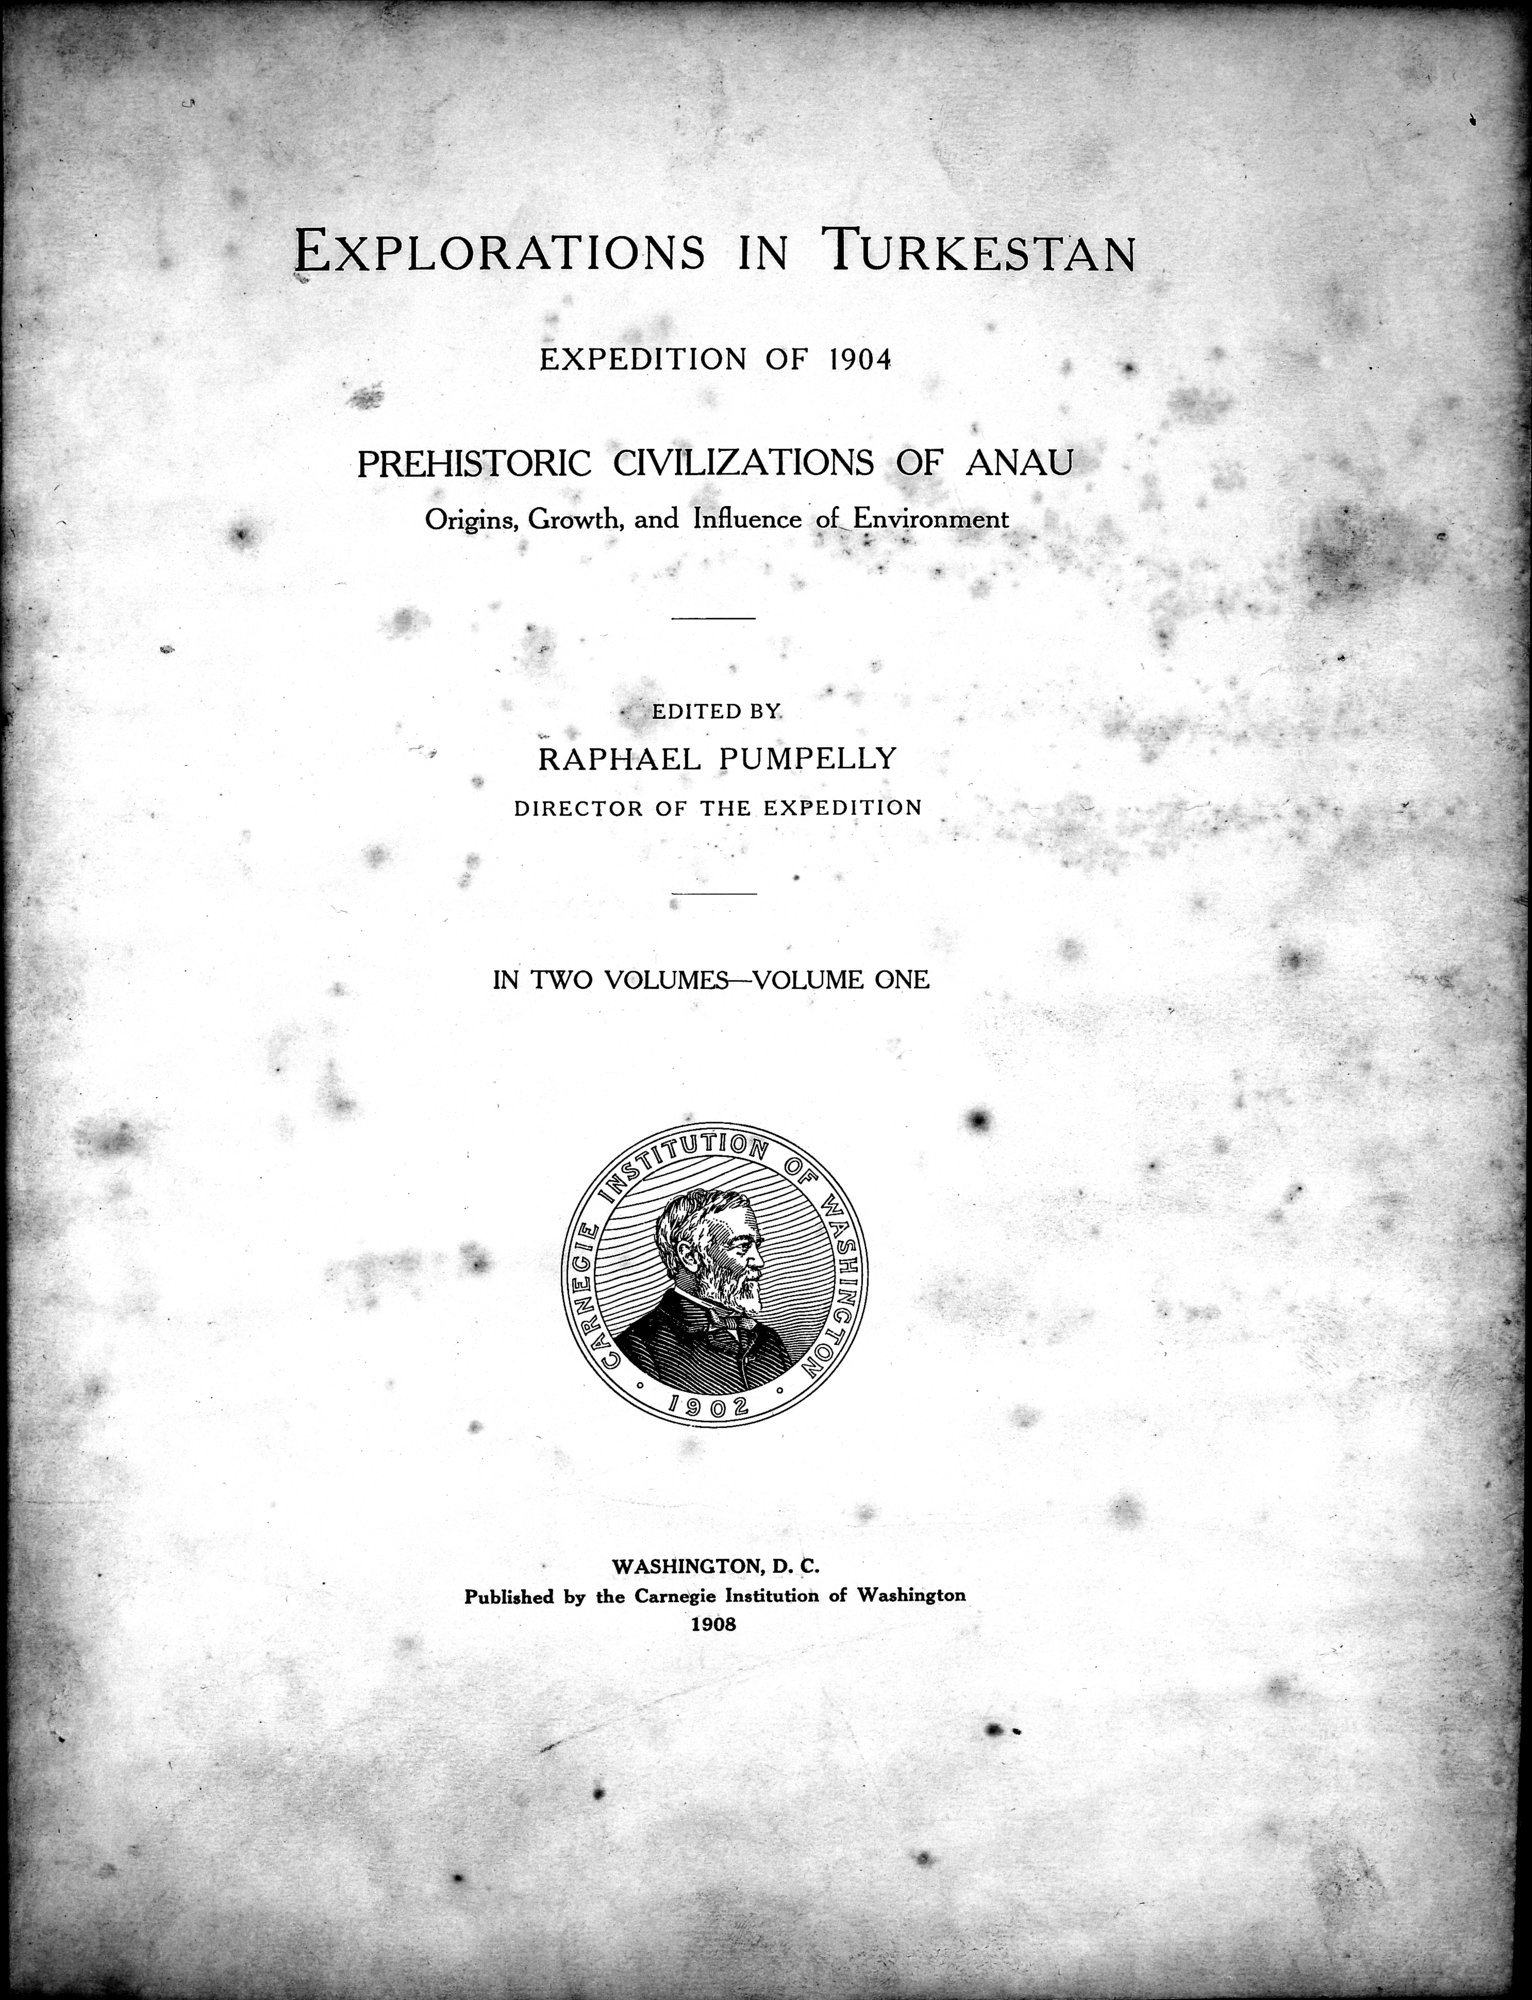 Explorations in Turkestan : Expedition of 1904 : vol.1 / Page 9 (Grayscale High Resolution Image)